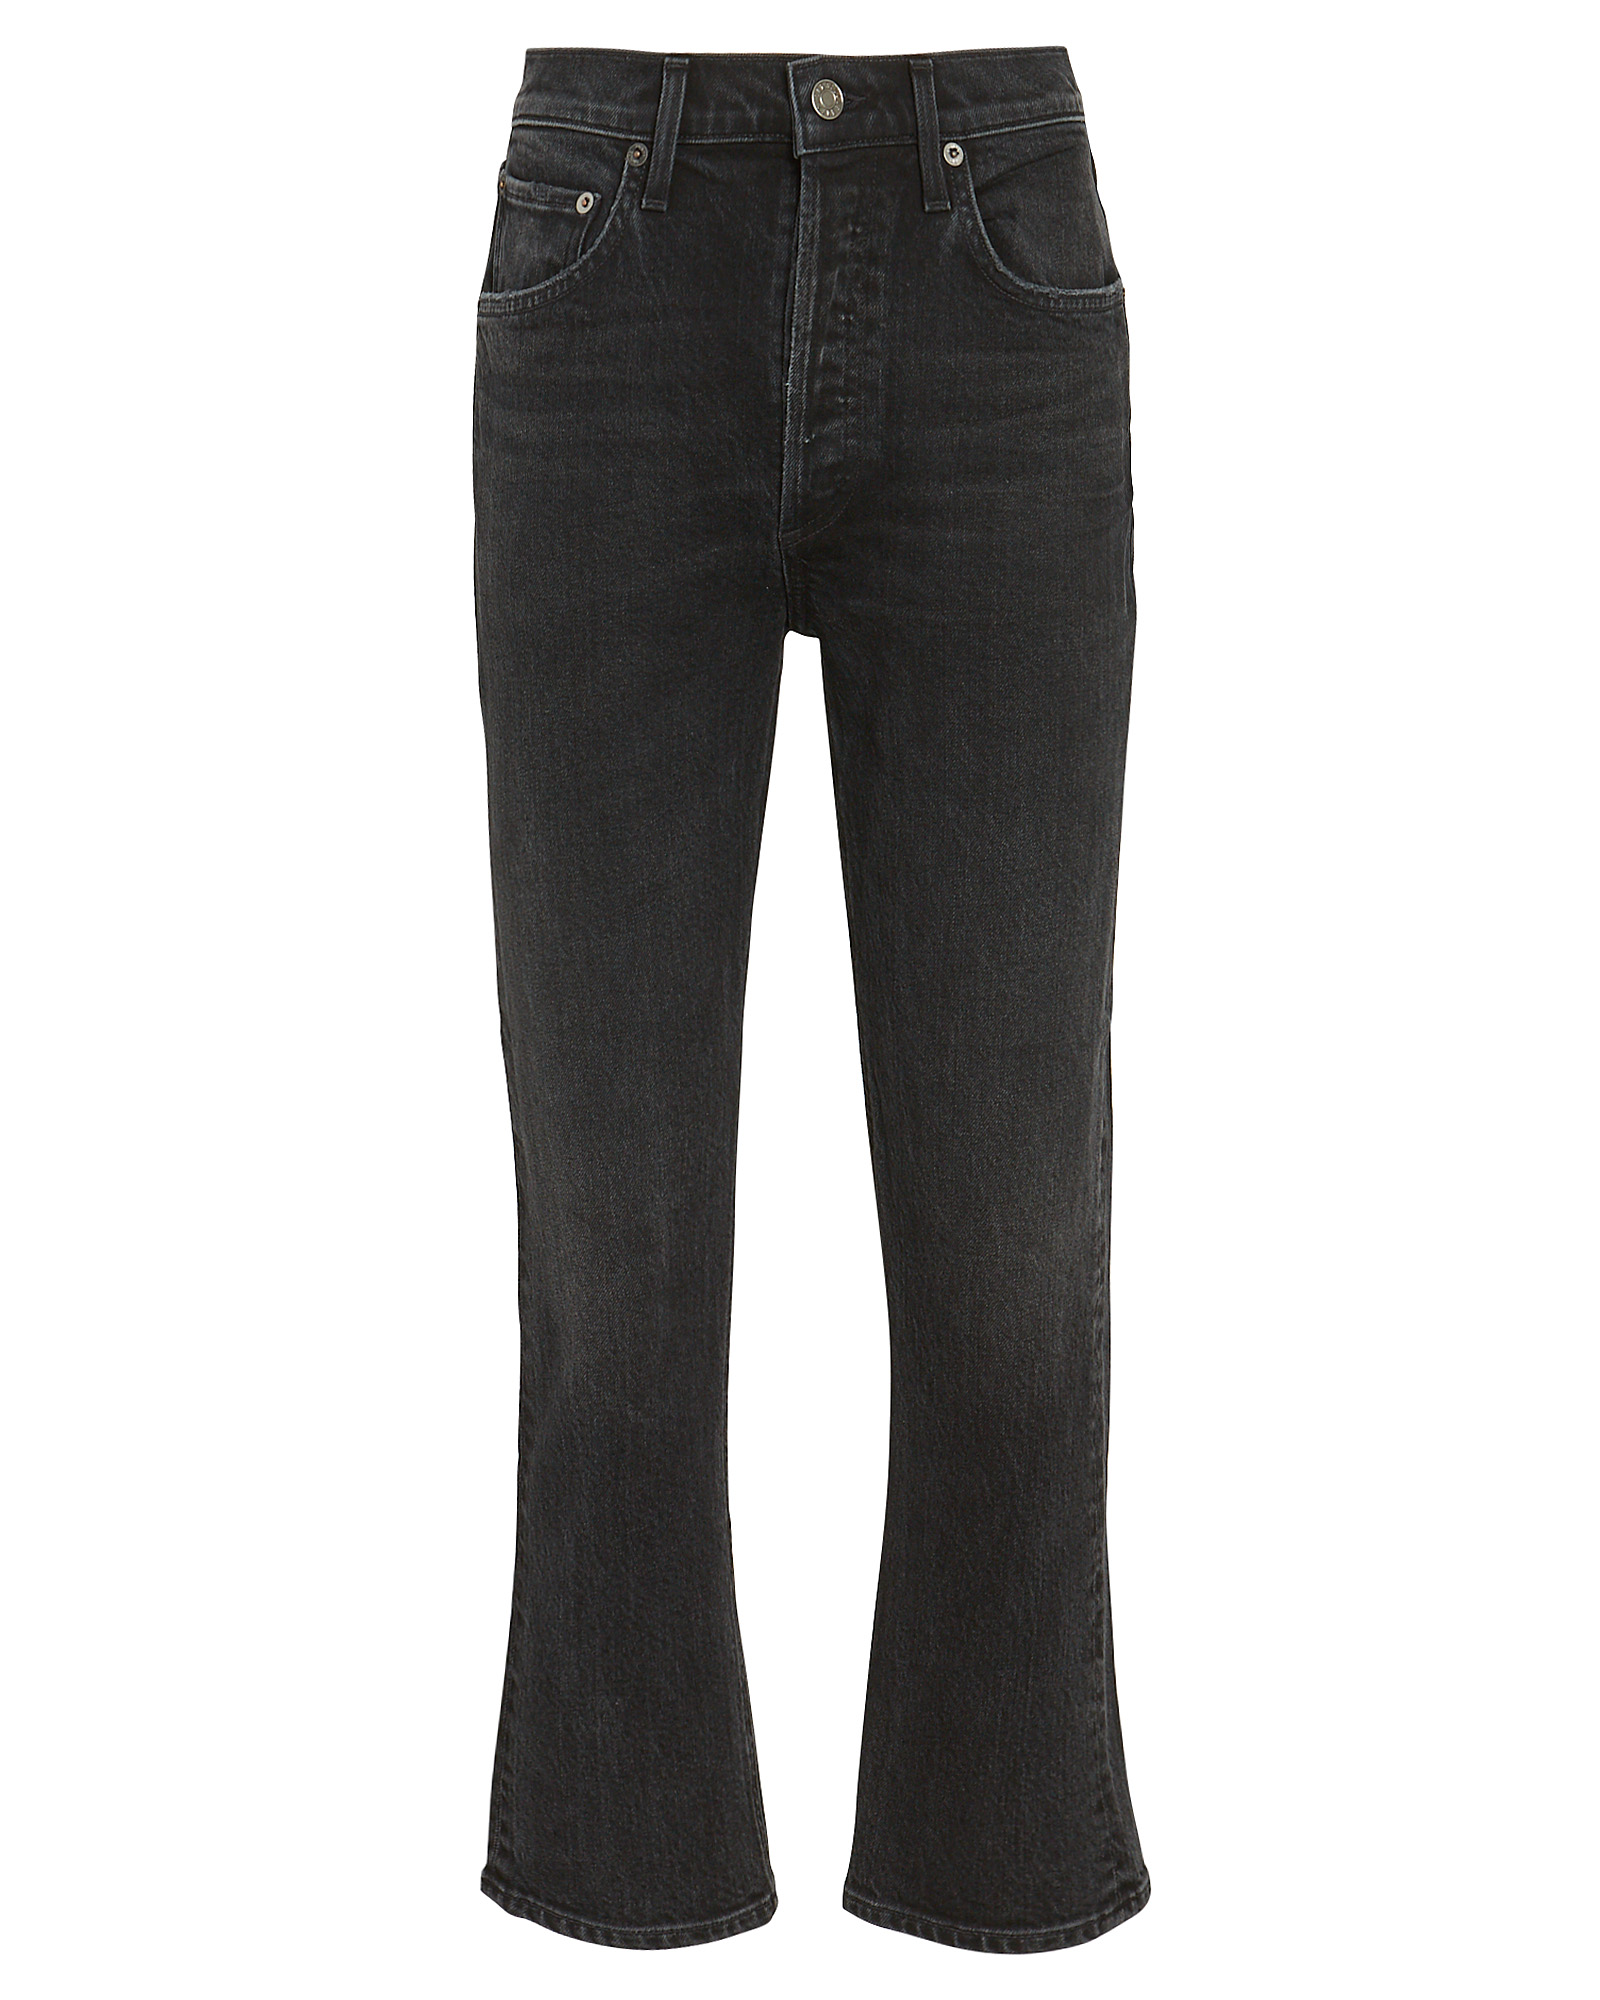 AGOLDE Riley High-Rise Straight Cropped Jeans, Black 27 | INTERMIX